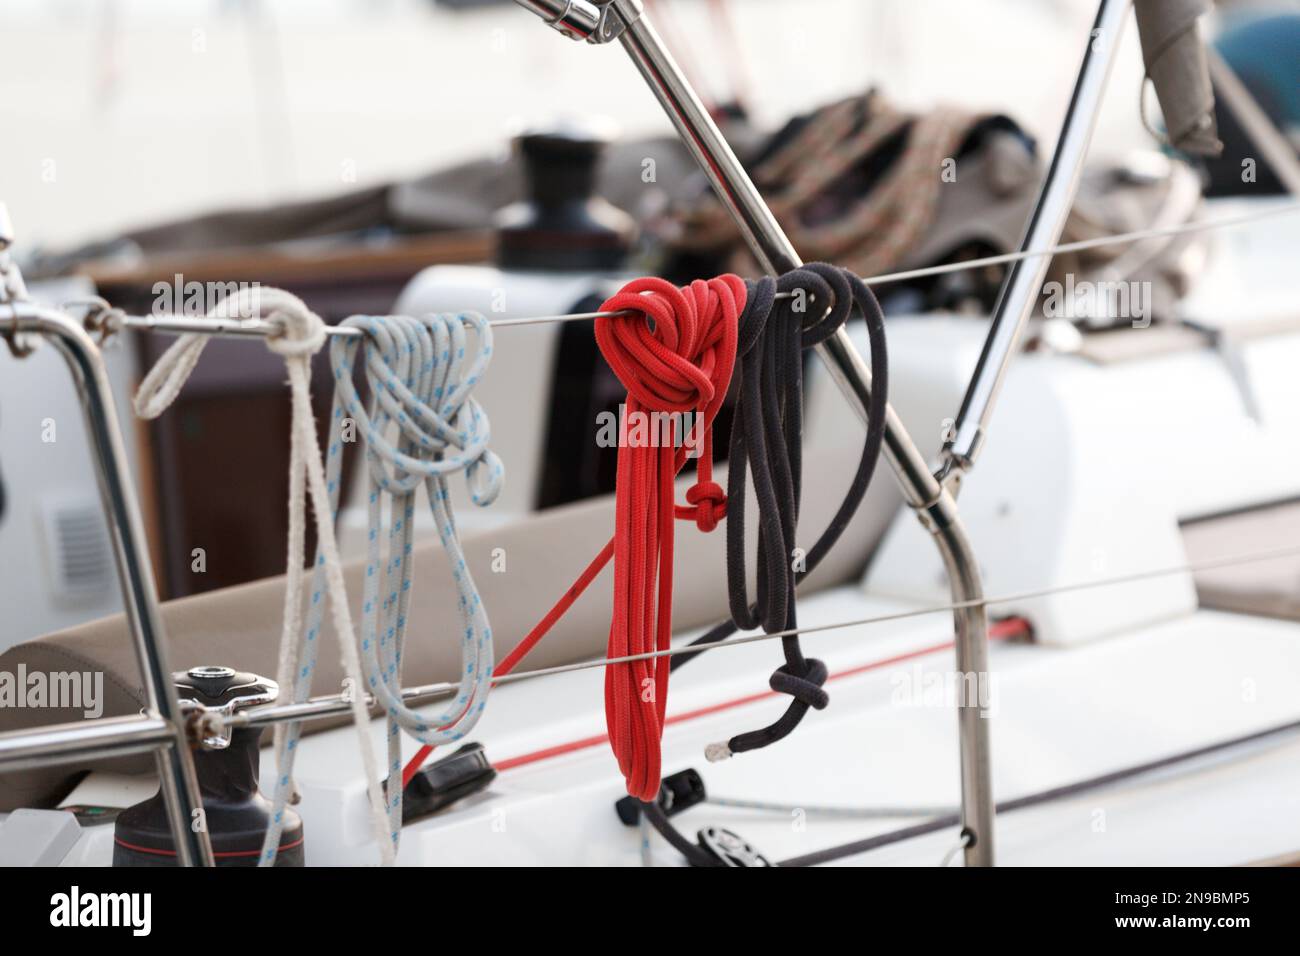 Nautical ropes on a deck. Winch and nautical ropes on a sailing boat. Details of sailing equipment on the boat. Close-up of rope knot, sailor's knot l Stock Photo